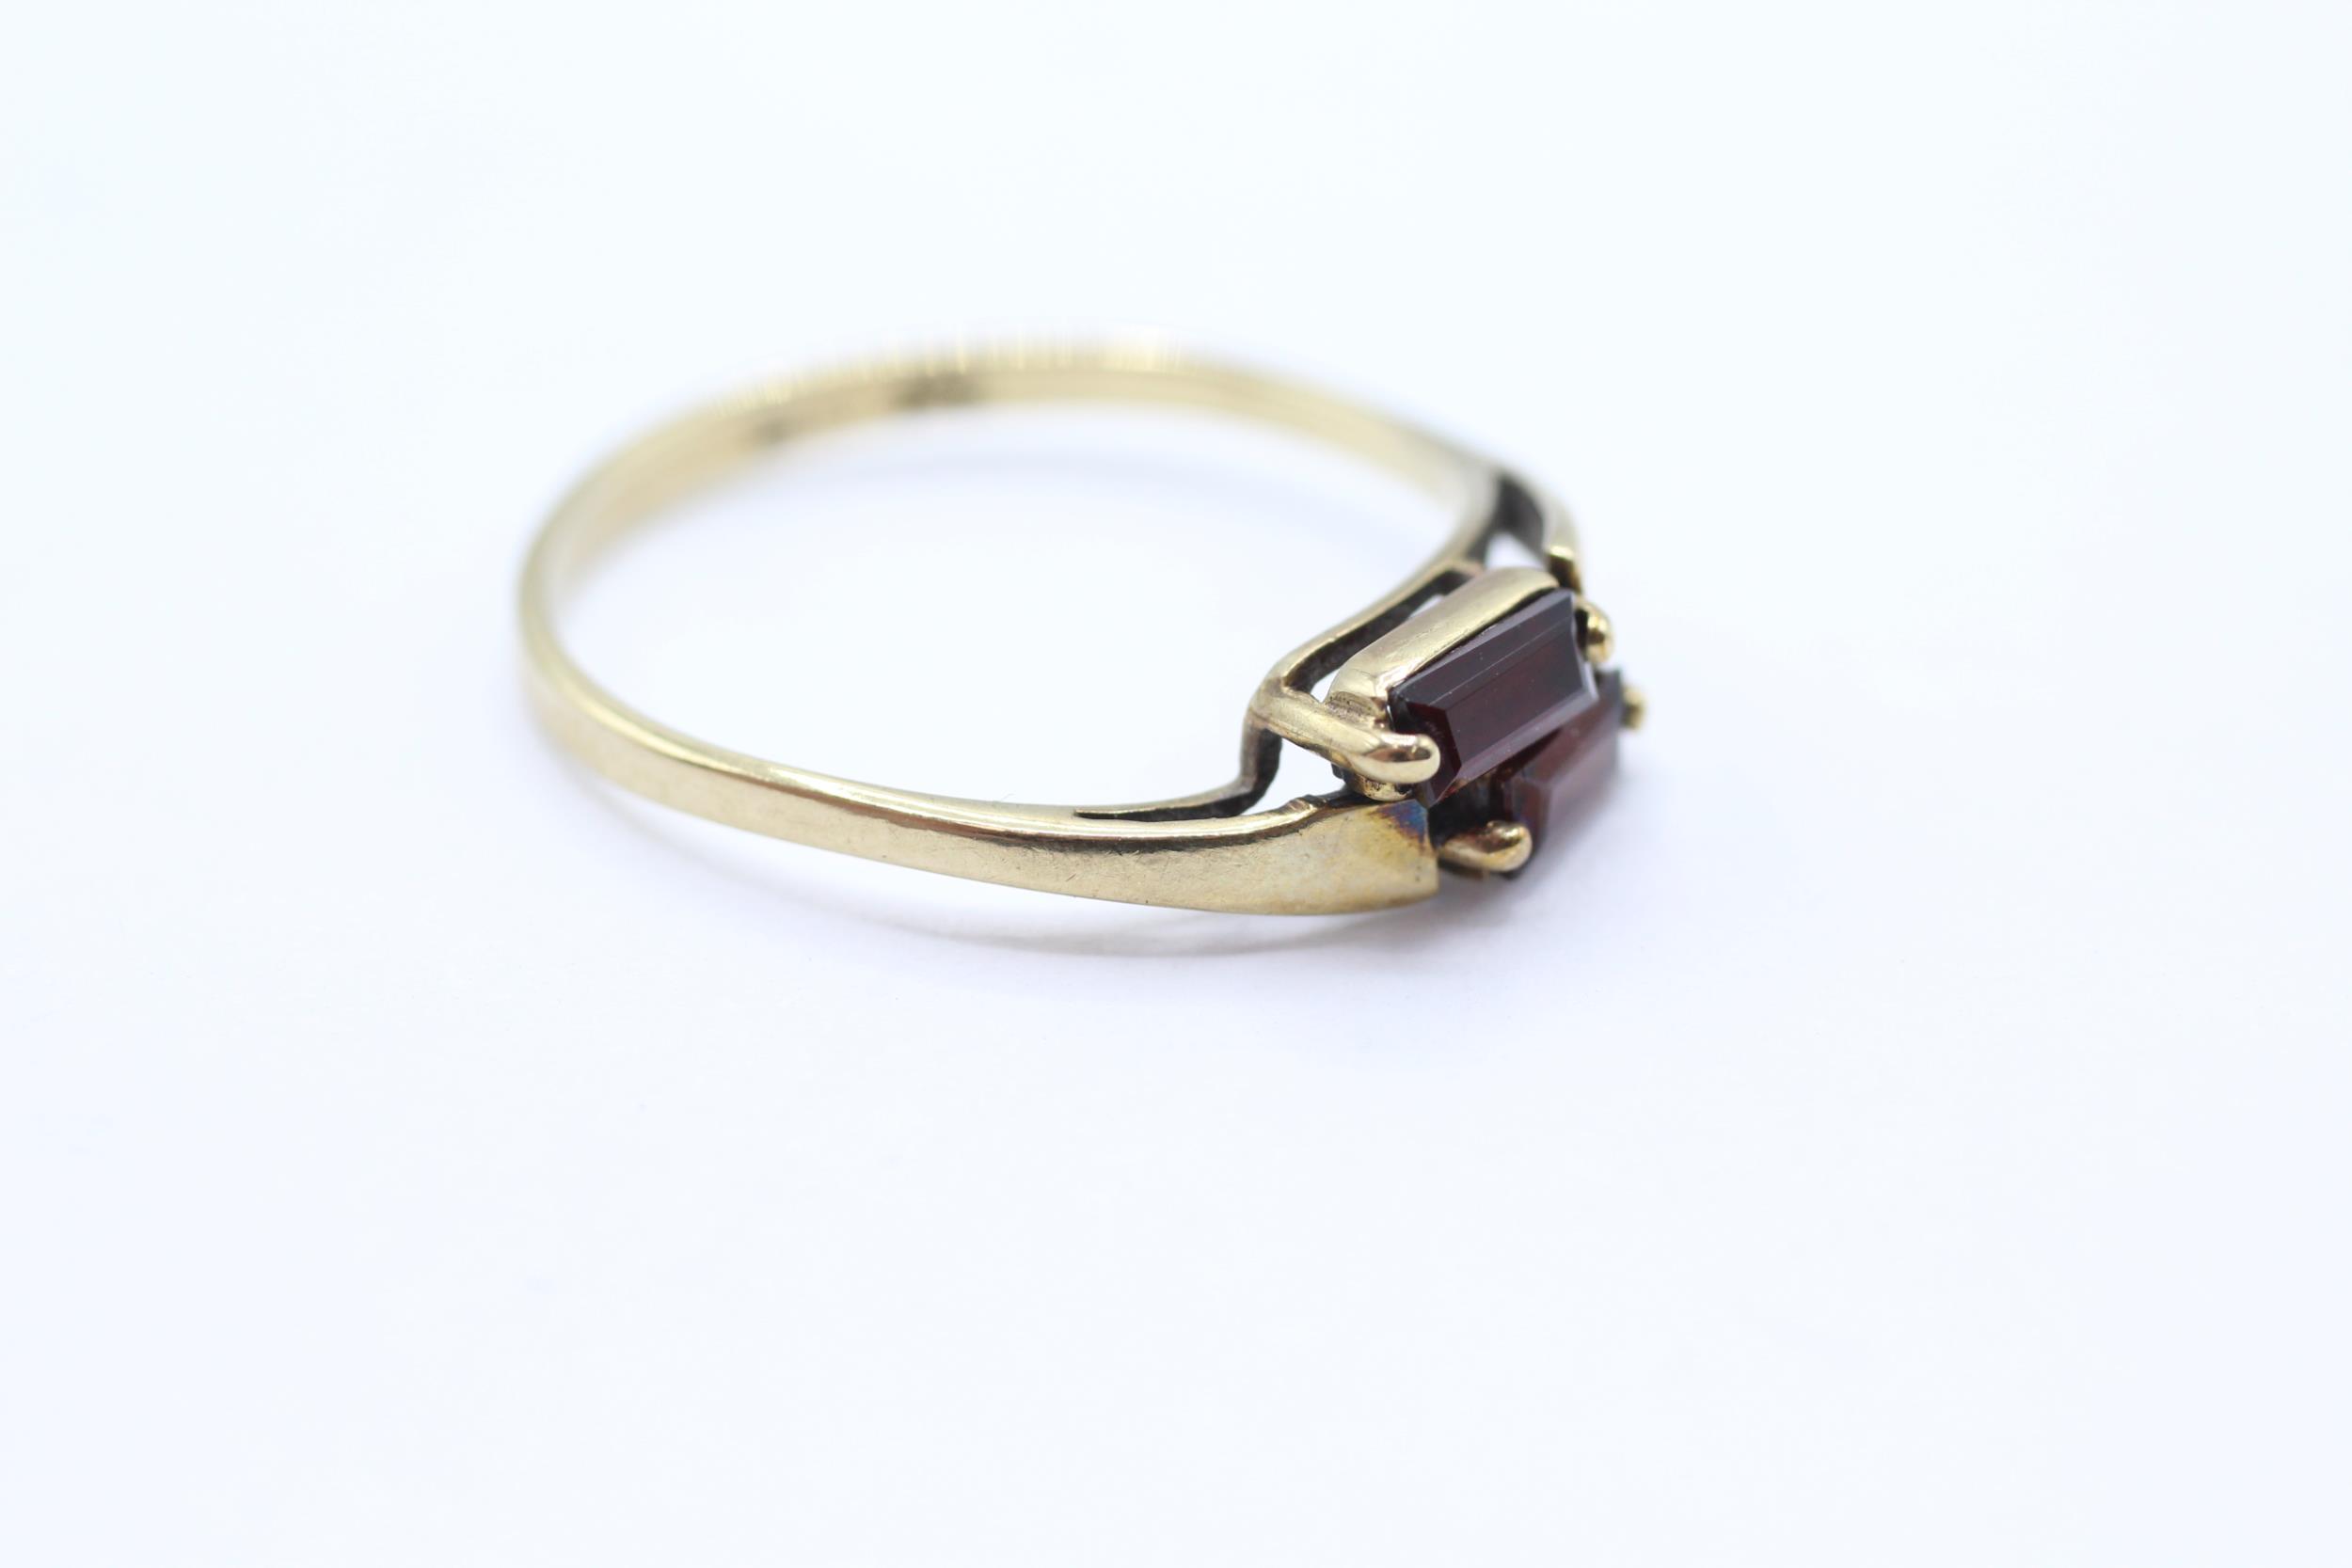 9ct gold garnet twin stone ring Size P - 1.4 g - Image 2 of 4